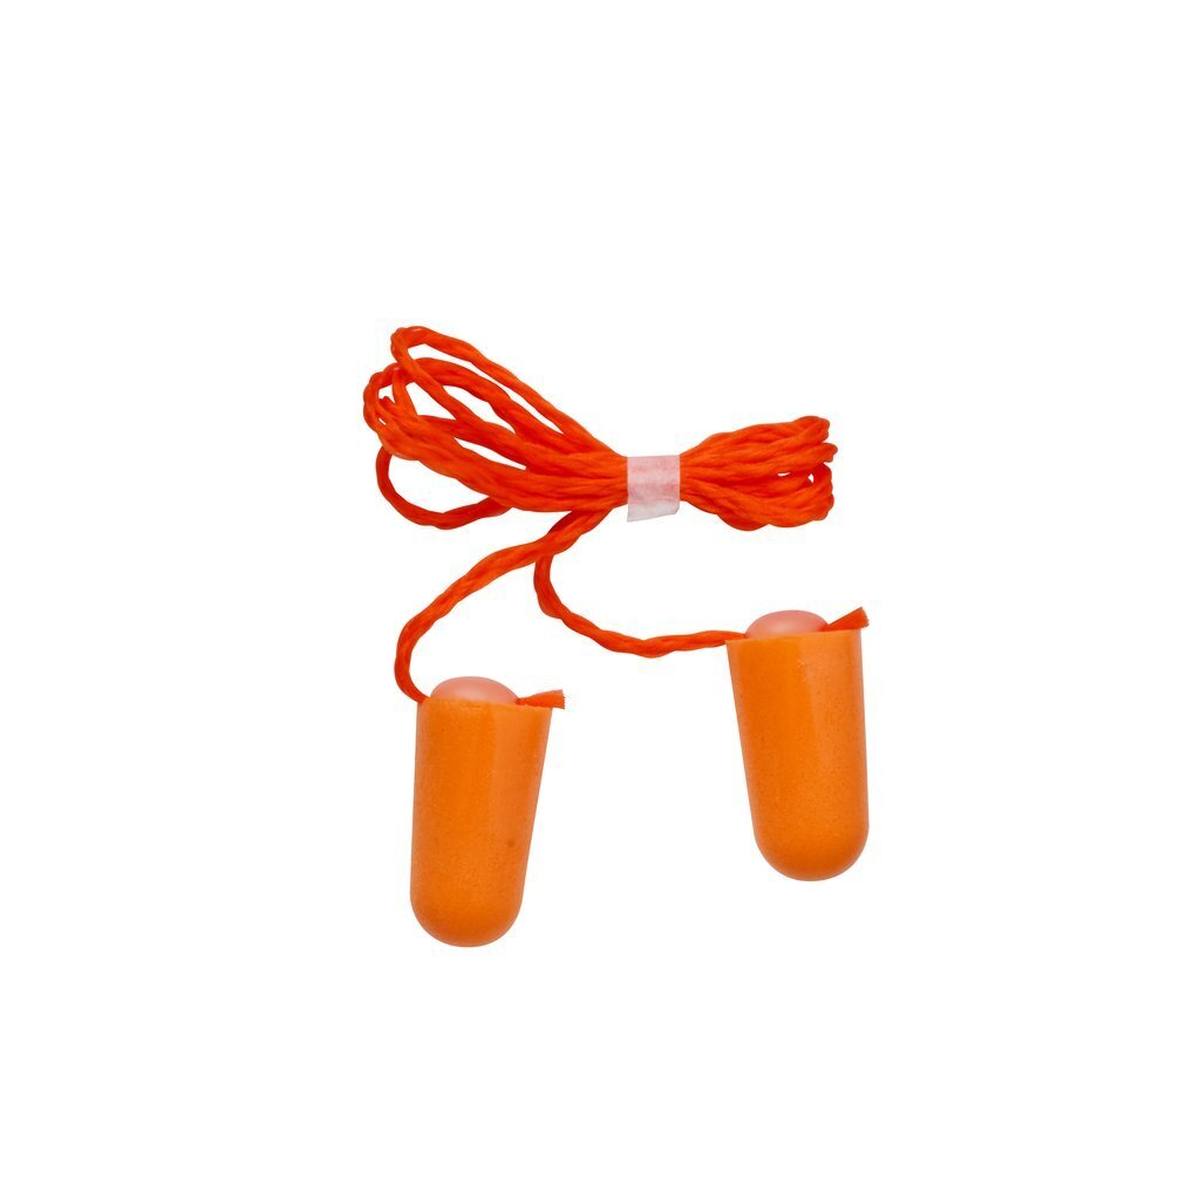 3M 1110 earplugs with cord, in pairs in polybag, SNR = 37 dB